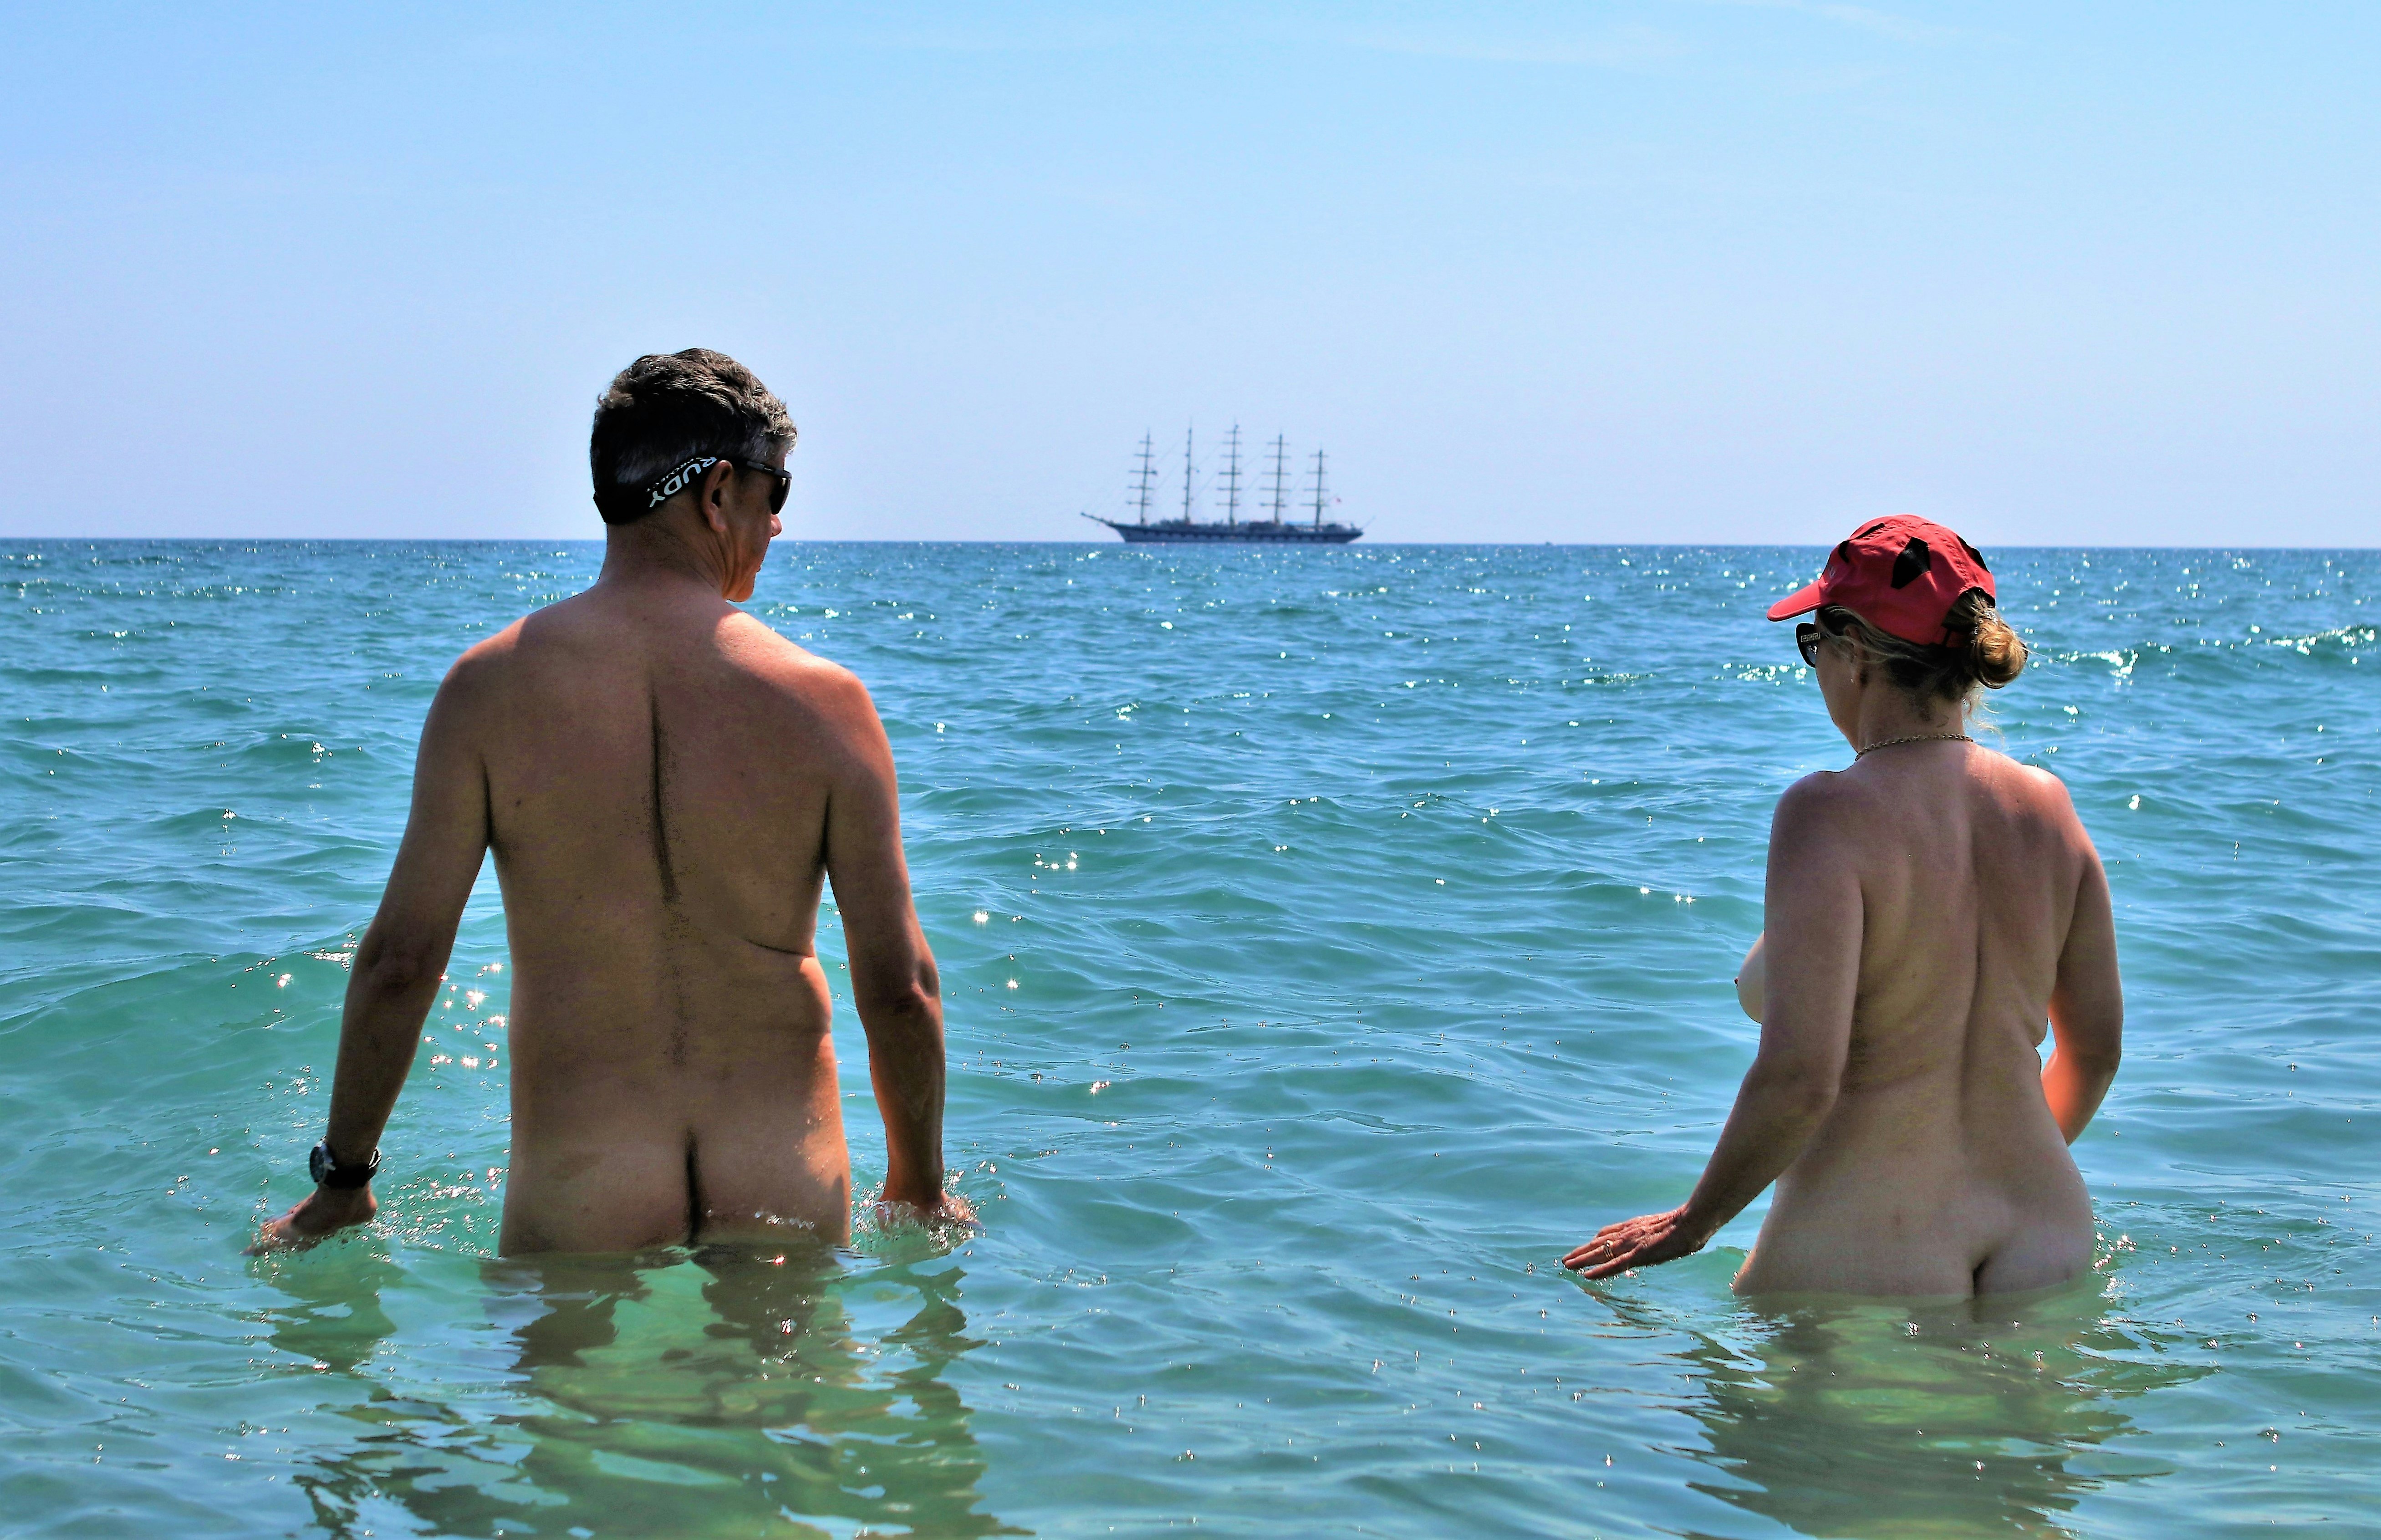 A couple wades through waist-high ocean water completely nude, though the man is wearing shades and the lady is wearing a baseball caps and sunglasses. There is a large schooner boat in the distance; nude cruise 